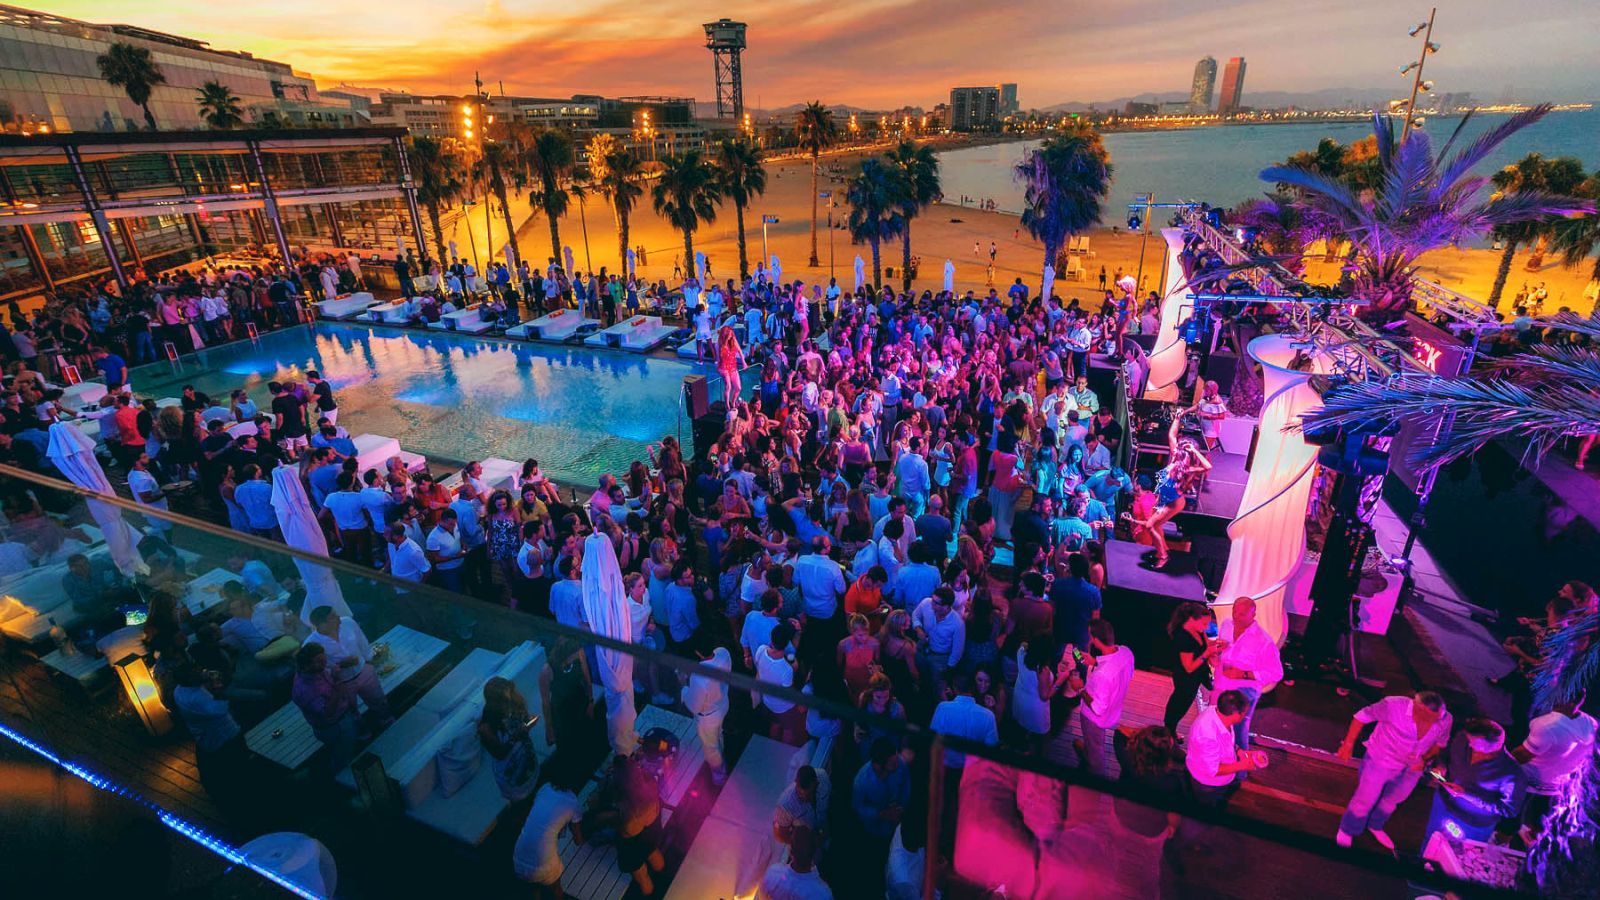 Barcelona Clubs: 5 Places to Experience the City's Best Nightlife - I'm  Barcelona VIP